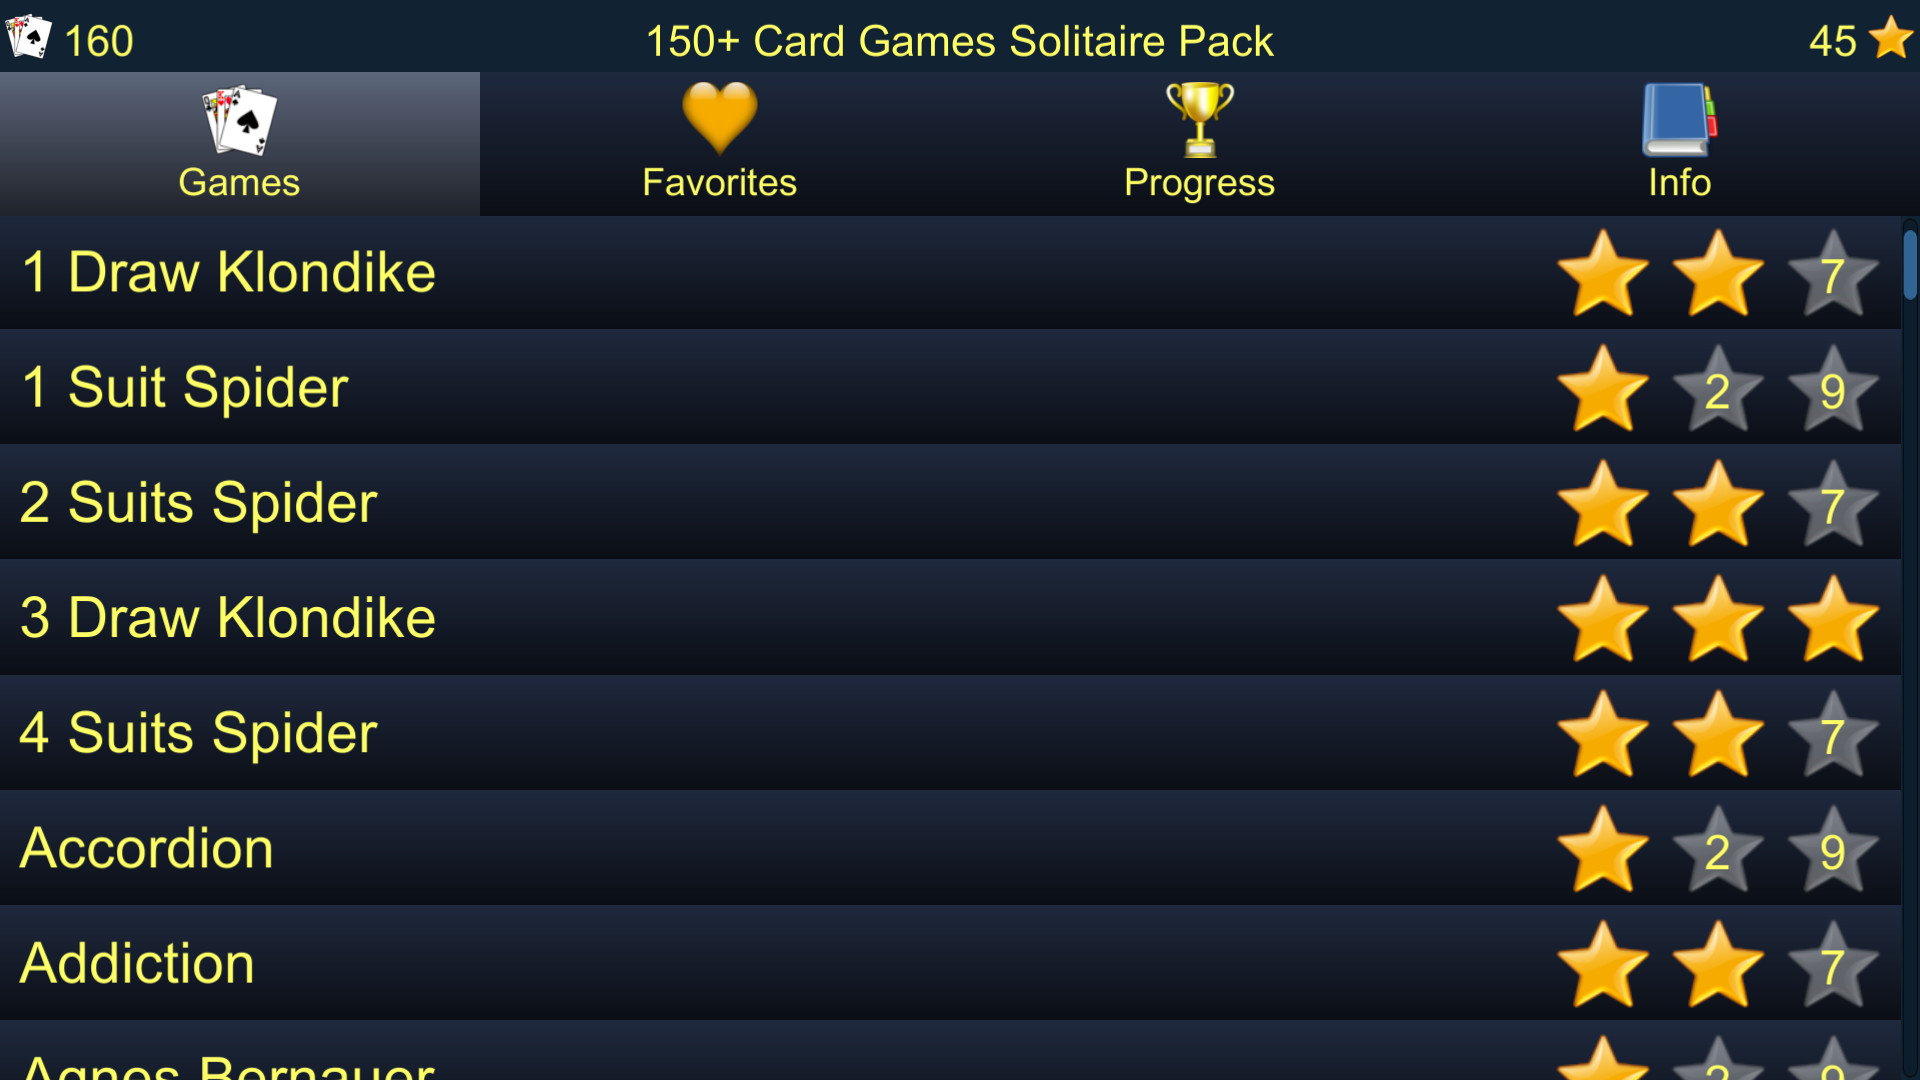 150+ Card Games Solitaire Pack Steam CD Key 0.63 $